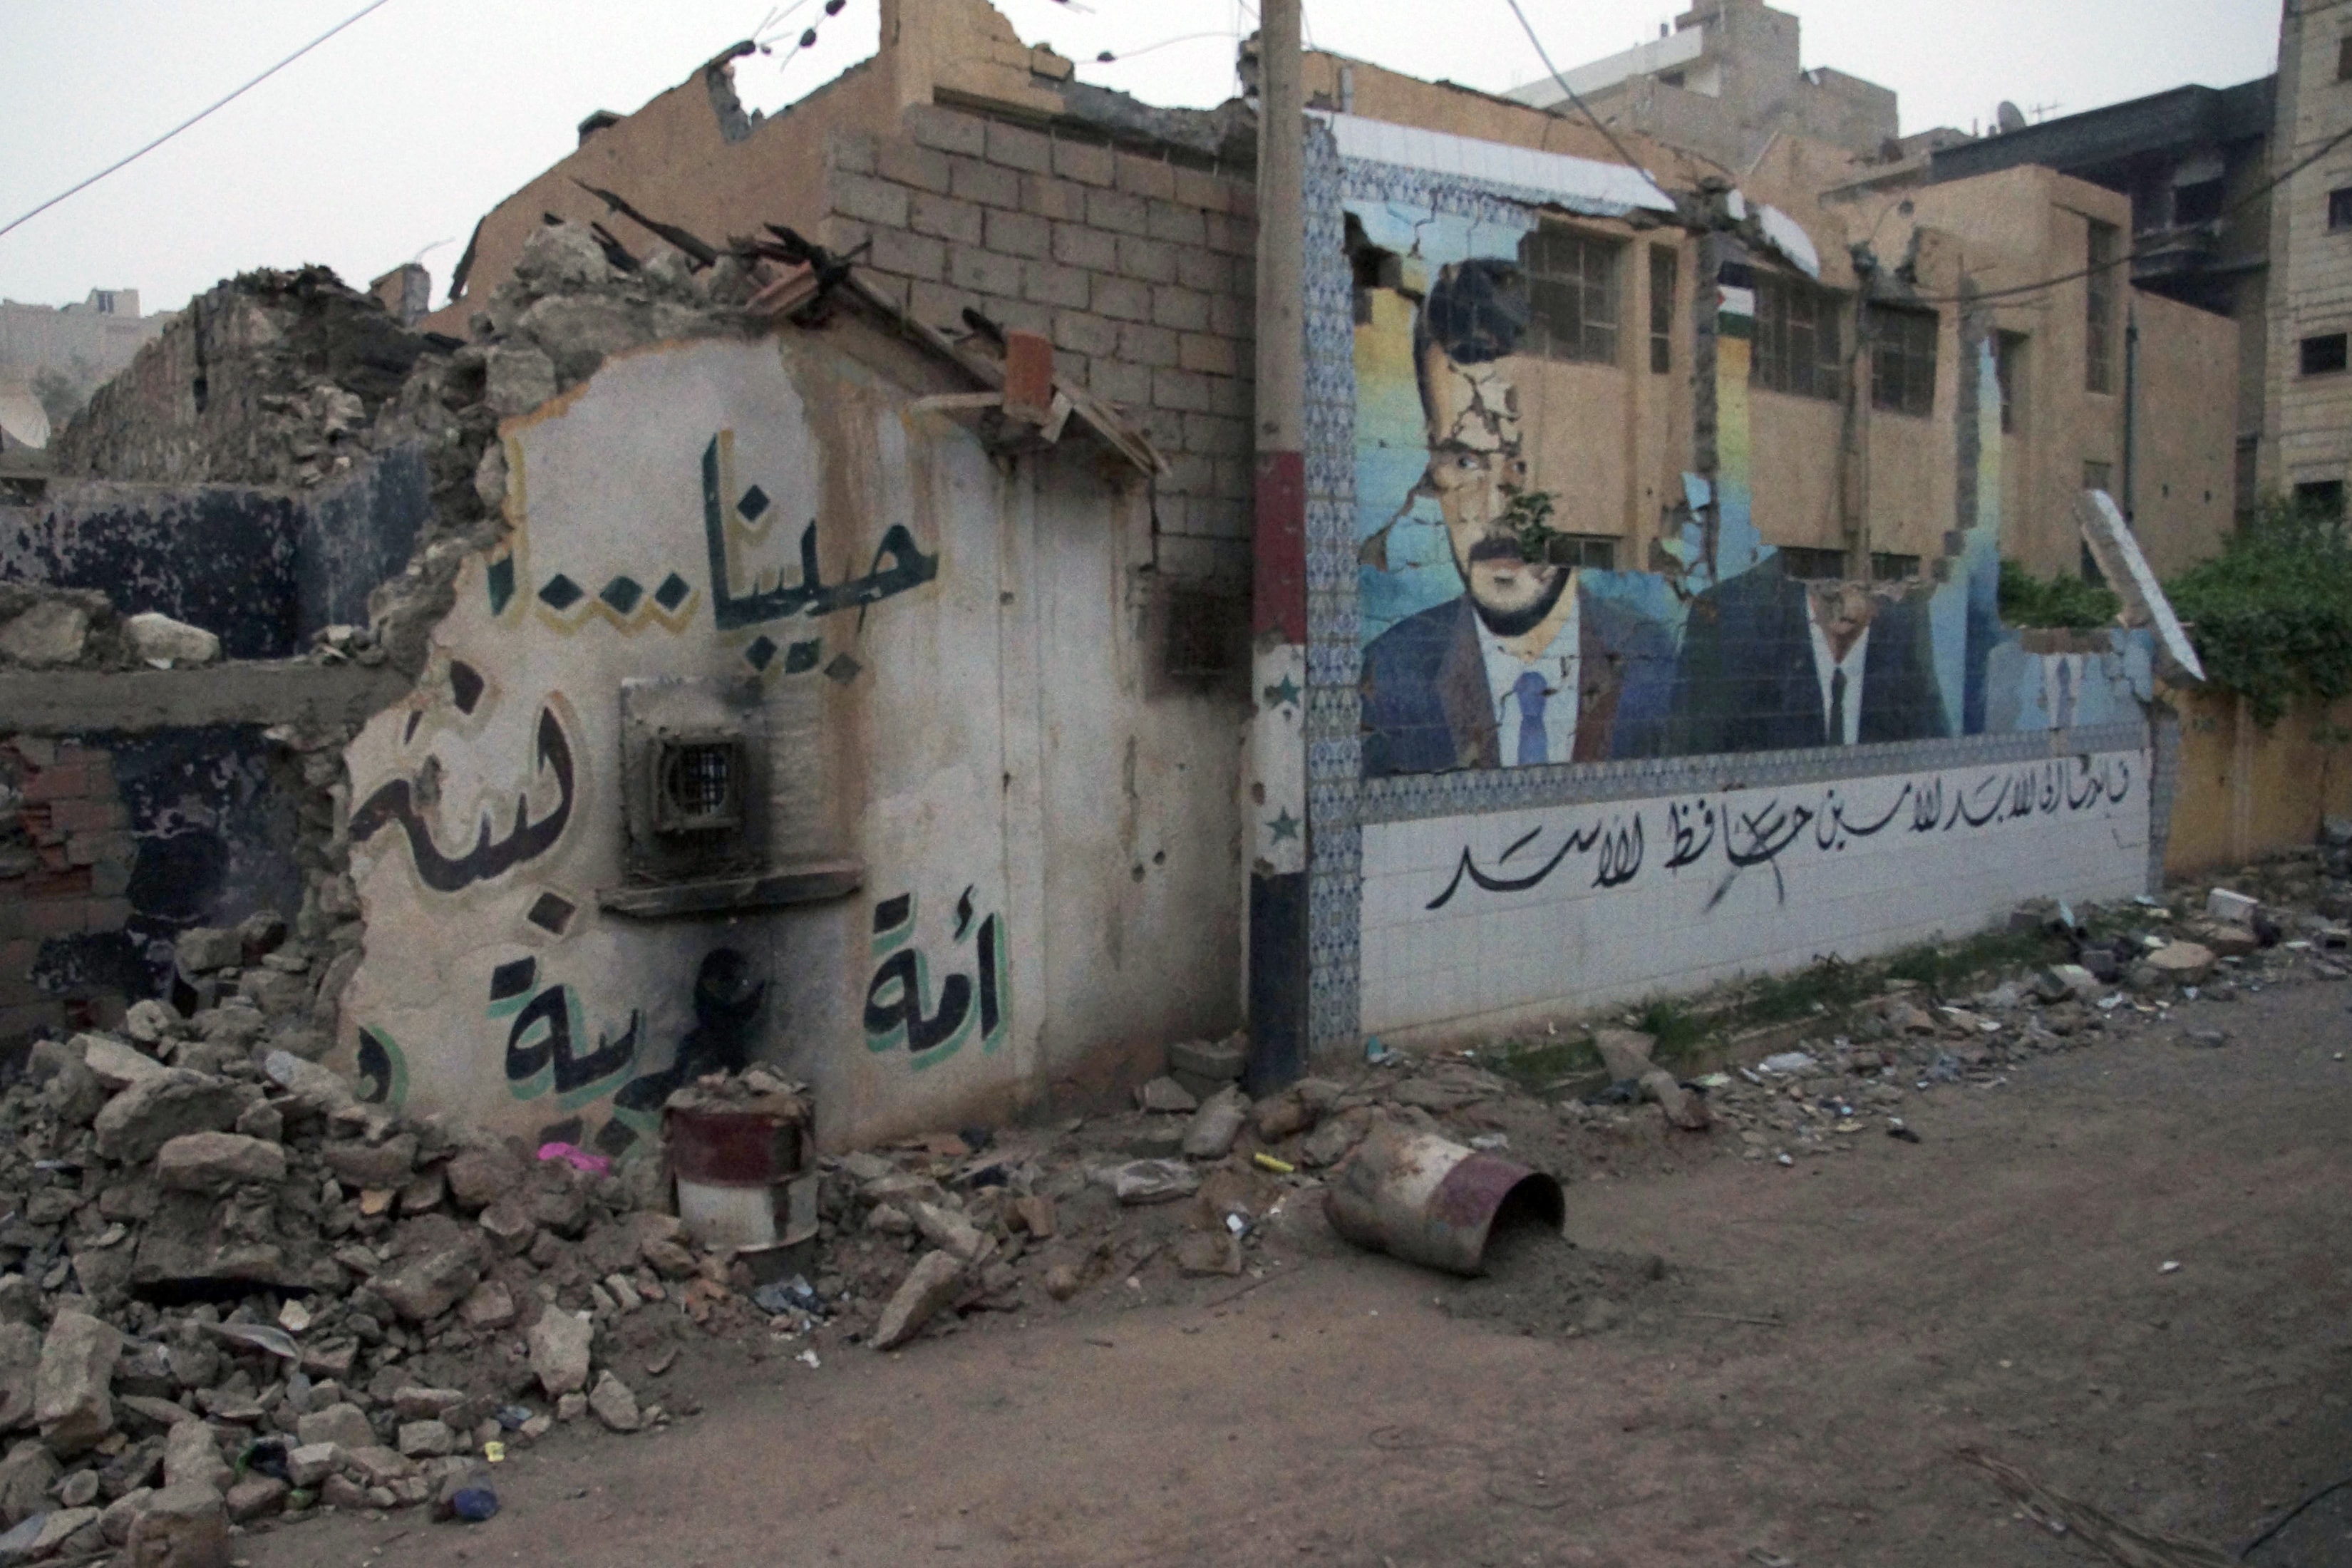 Defaced pictures of former Syrian President Hafez al-Assad (C) and the current President Bashar al-Assad, are seen on a damaged mural at a regime's security base after it was seized by rebel fighters in Deir al-Zor, REUTERS/ Khalil Ashawi